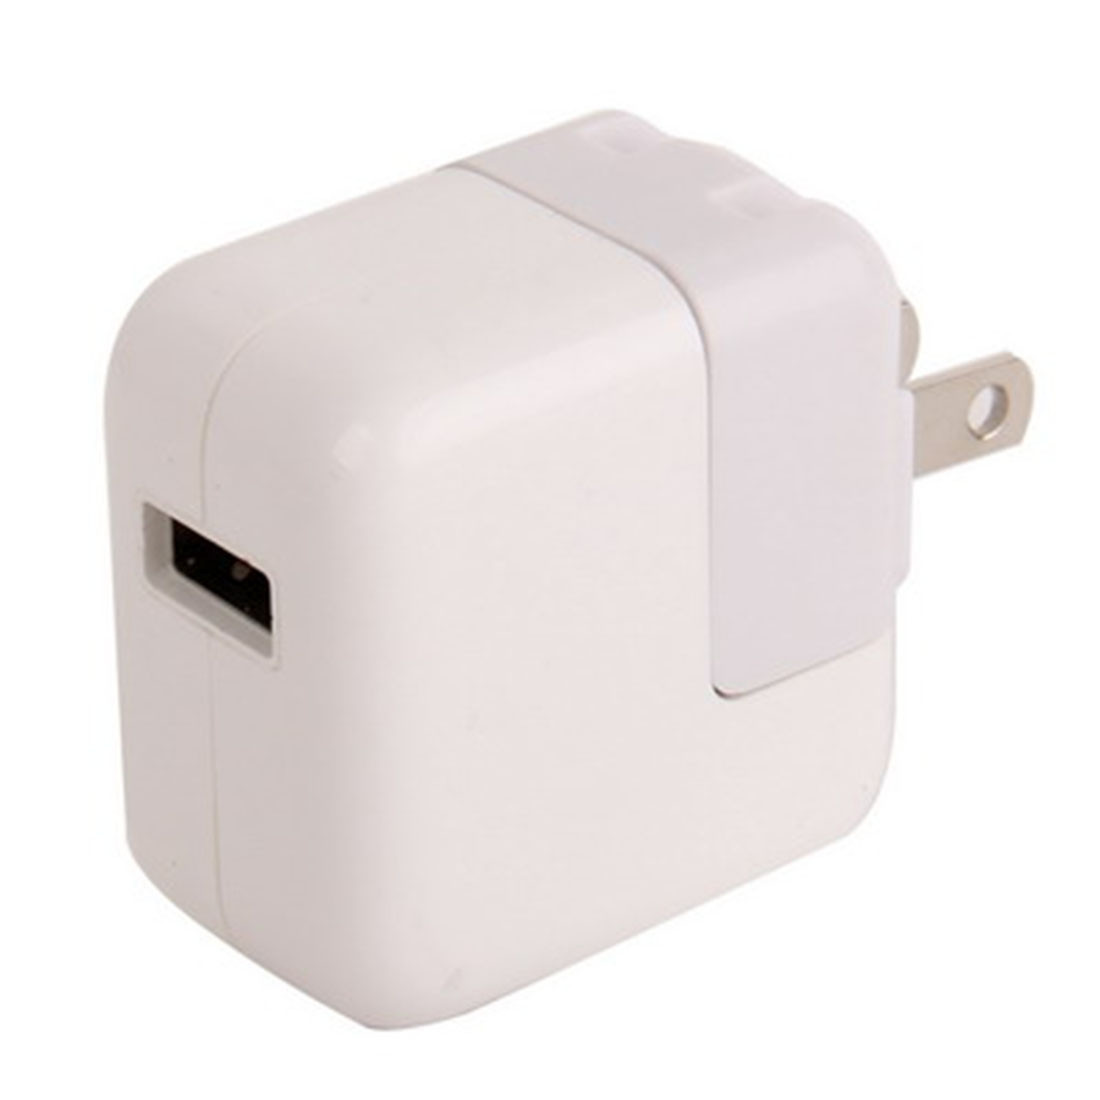 Prise USB Adaptateur chargeur USB pour iPad iPhone Galaxy Huawei Xiaom